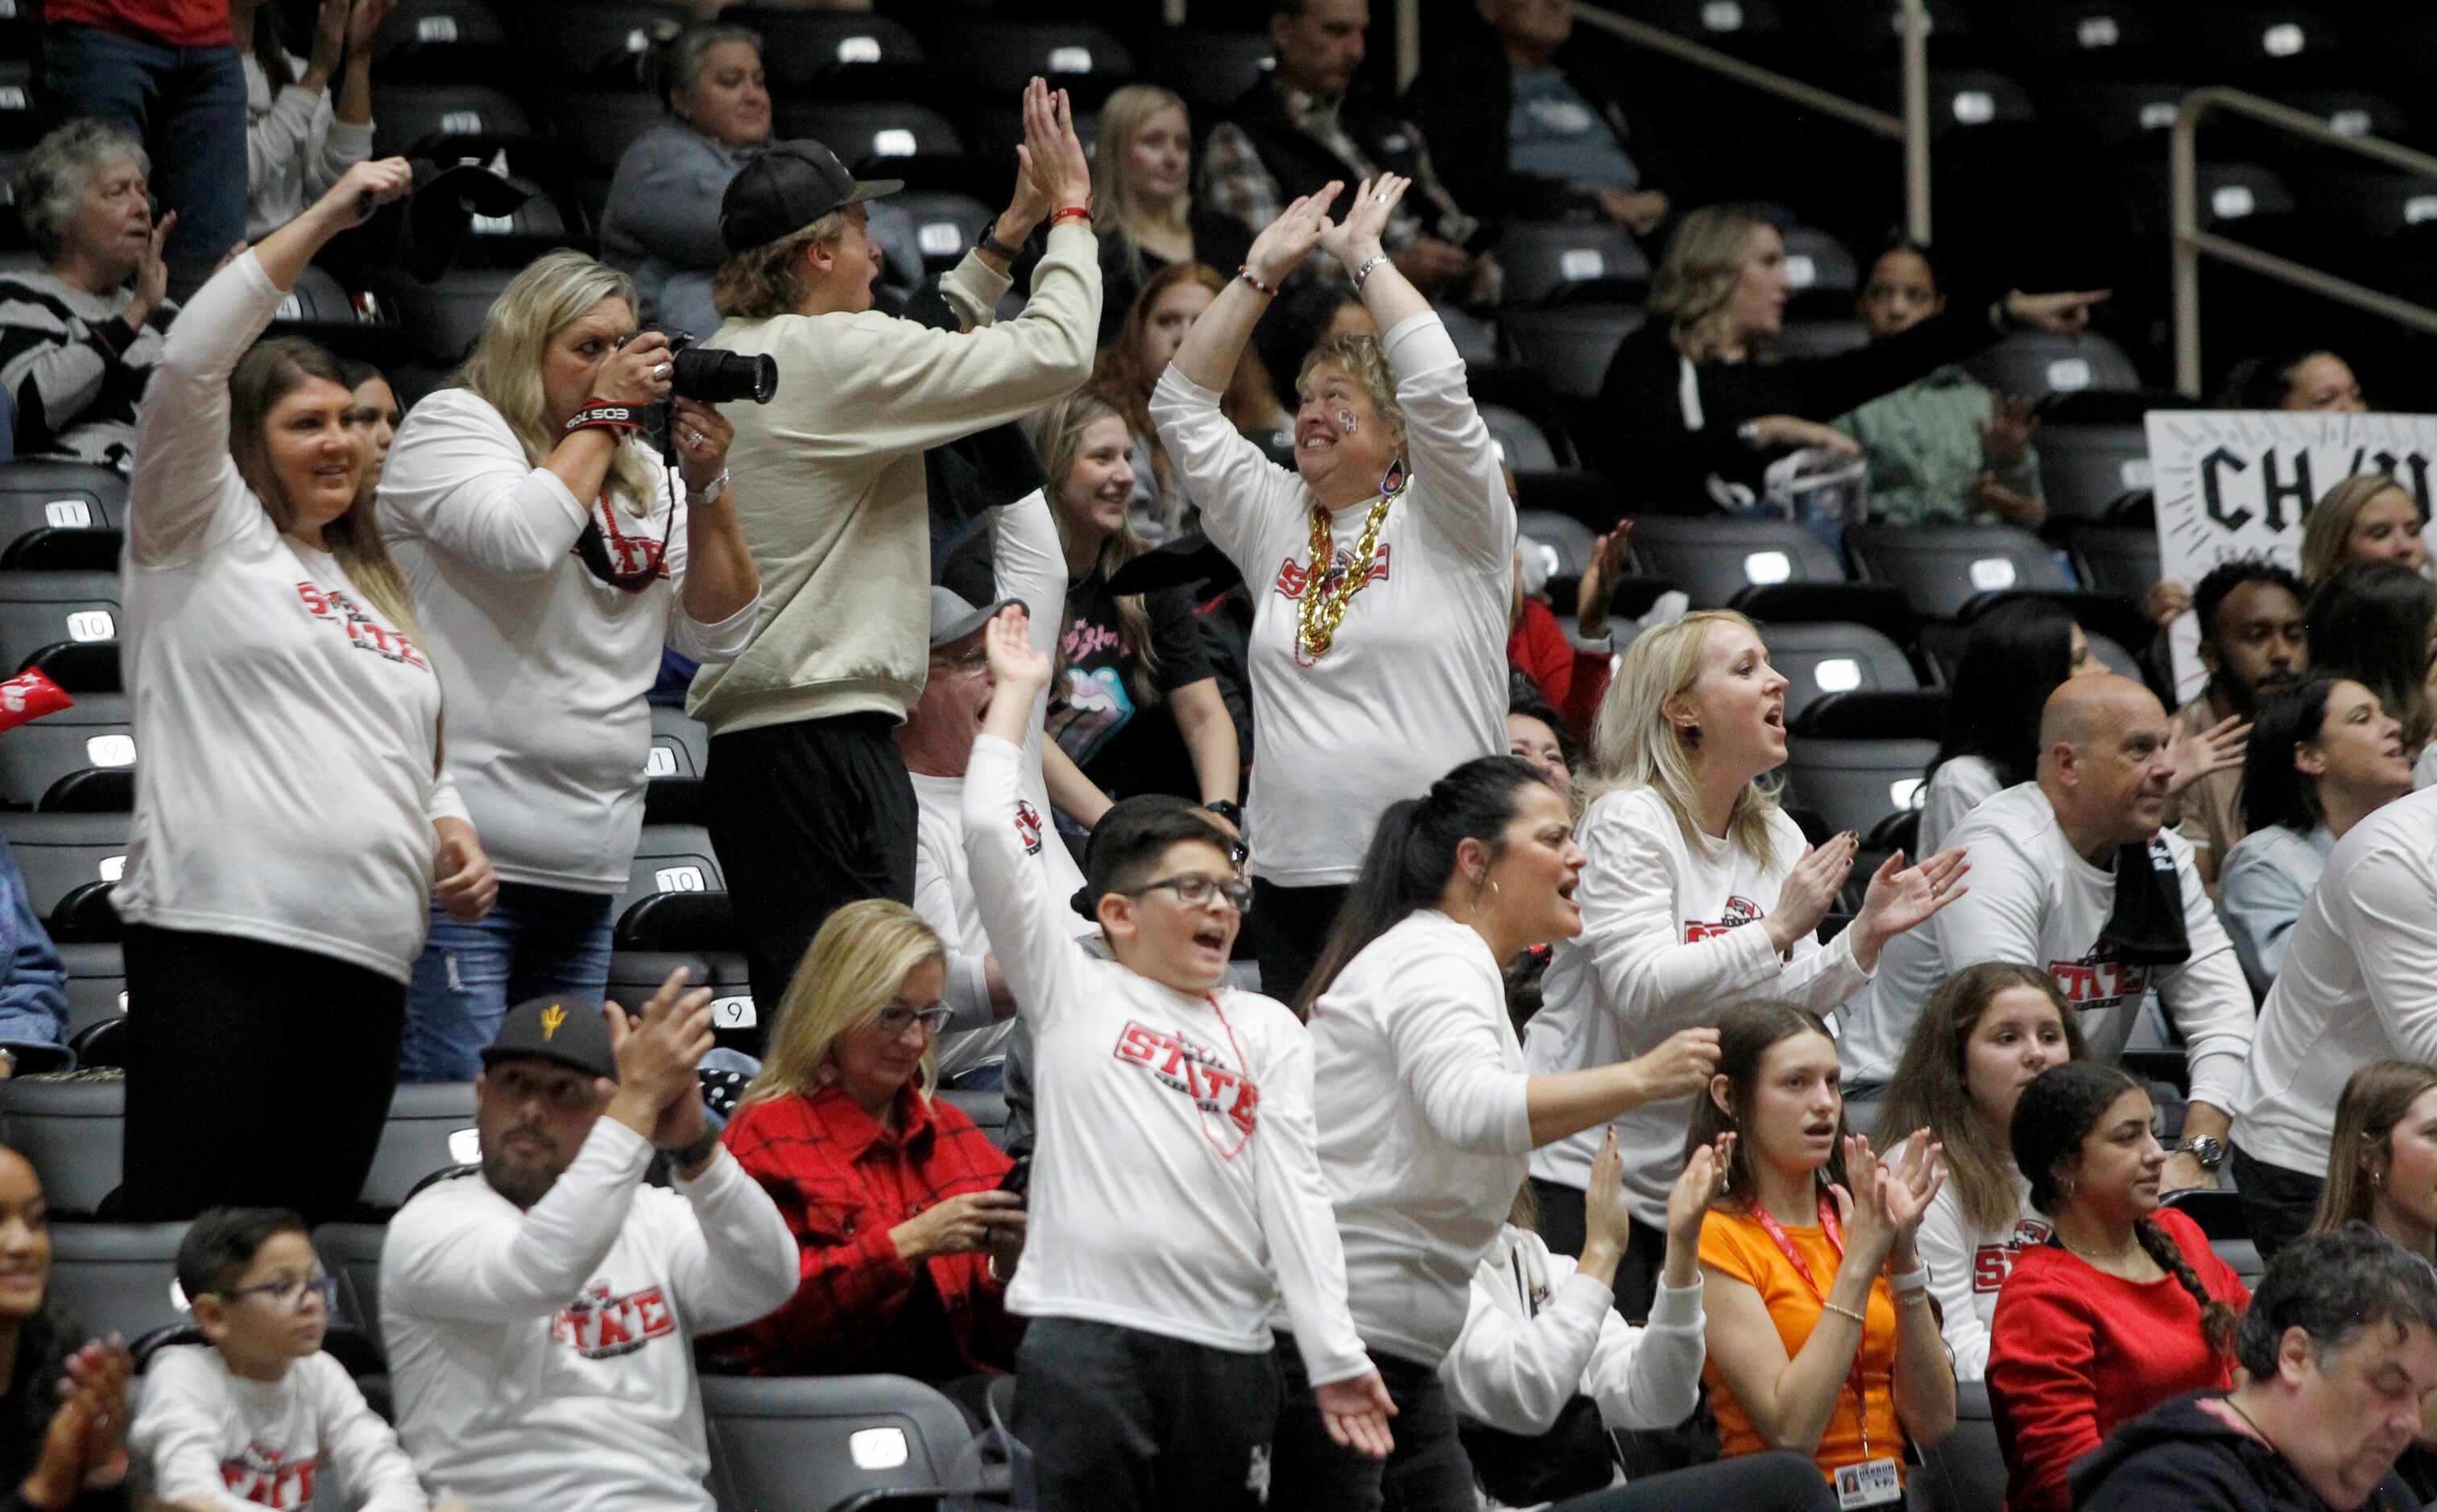 Colleyville Heritage fans react after a score during the second set of their match against...